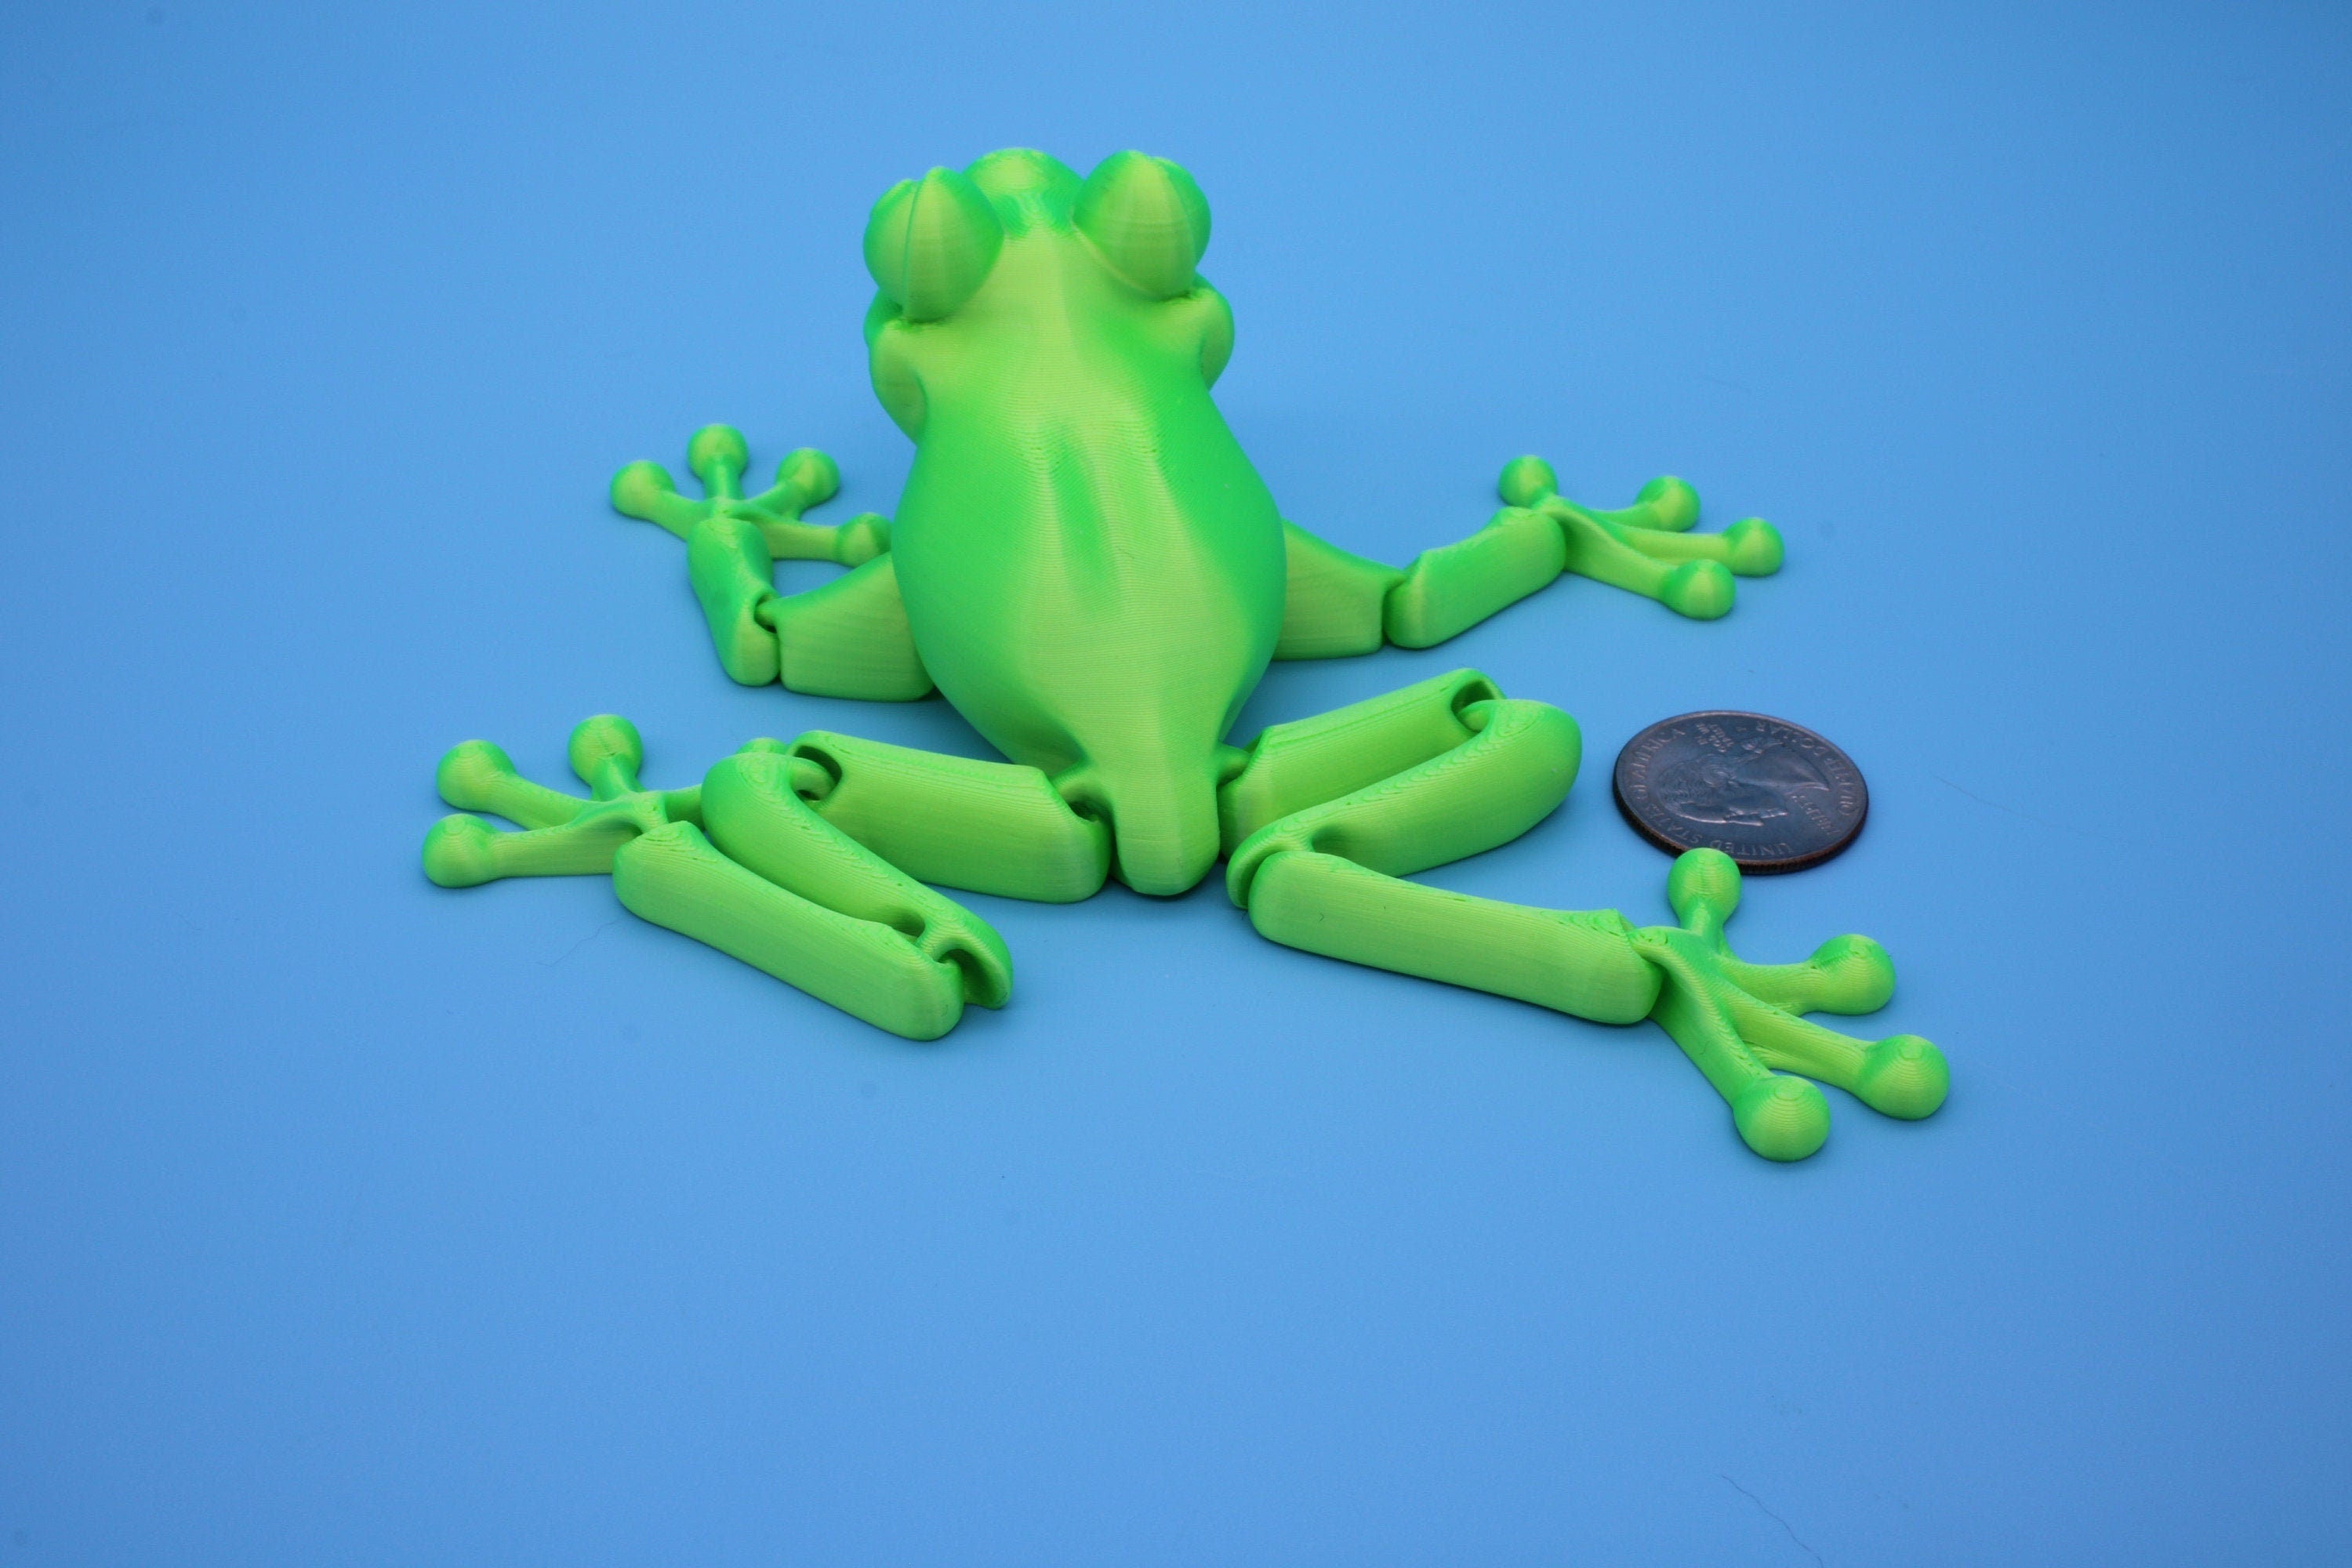 Green Frog | Cute Flexi Toy | Articulating Frog | 3D printed Unique Fidget | Desk Buddy | Sensory Toy | Stim Toy | Small Flexi Toy.